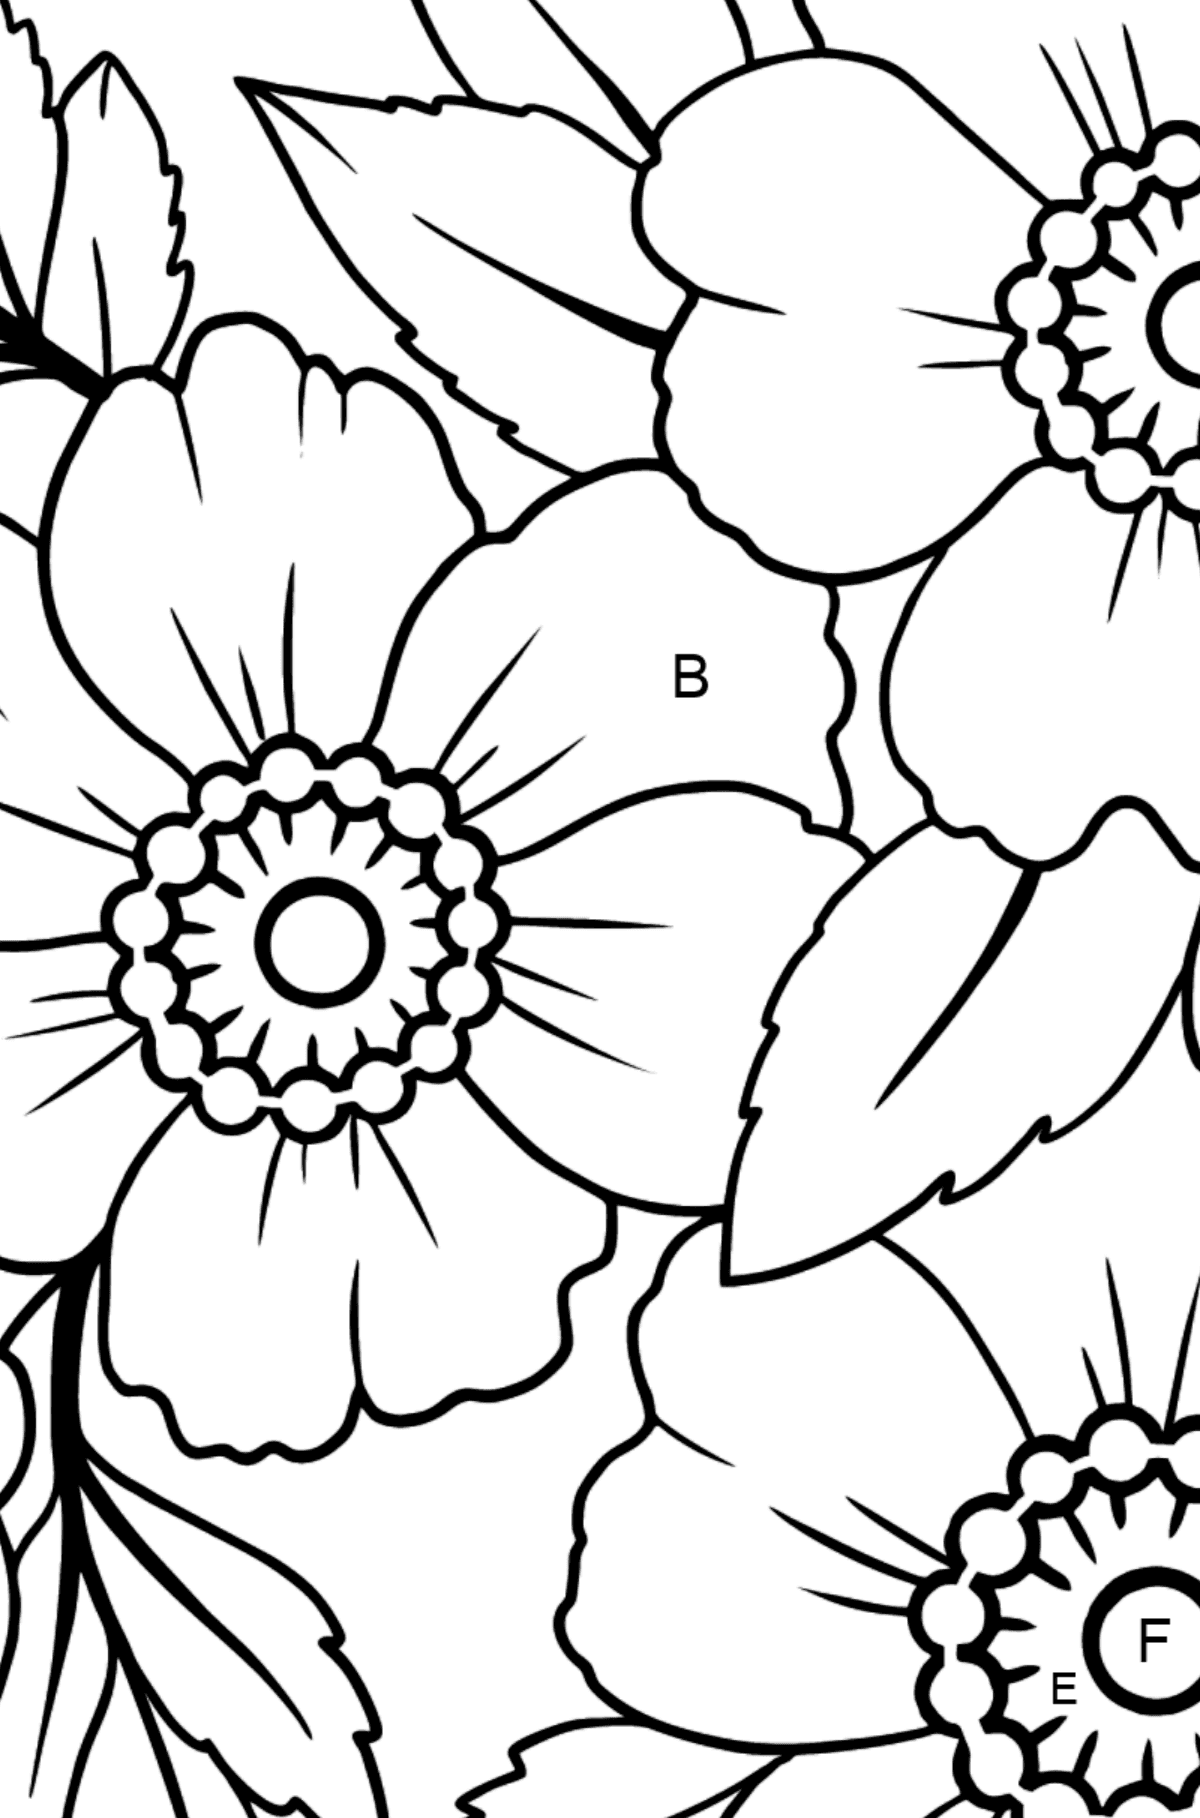 Flower Coloring Page - Japanese Velvet Anemone - Coloring by Letters for Kids